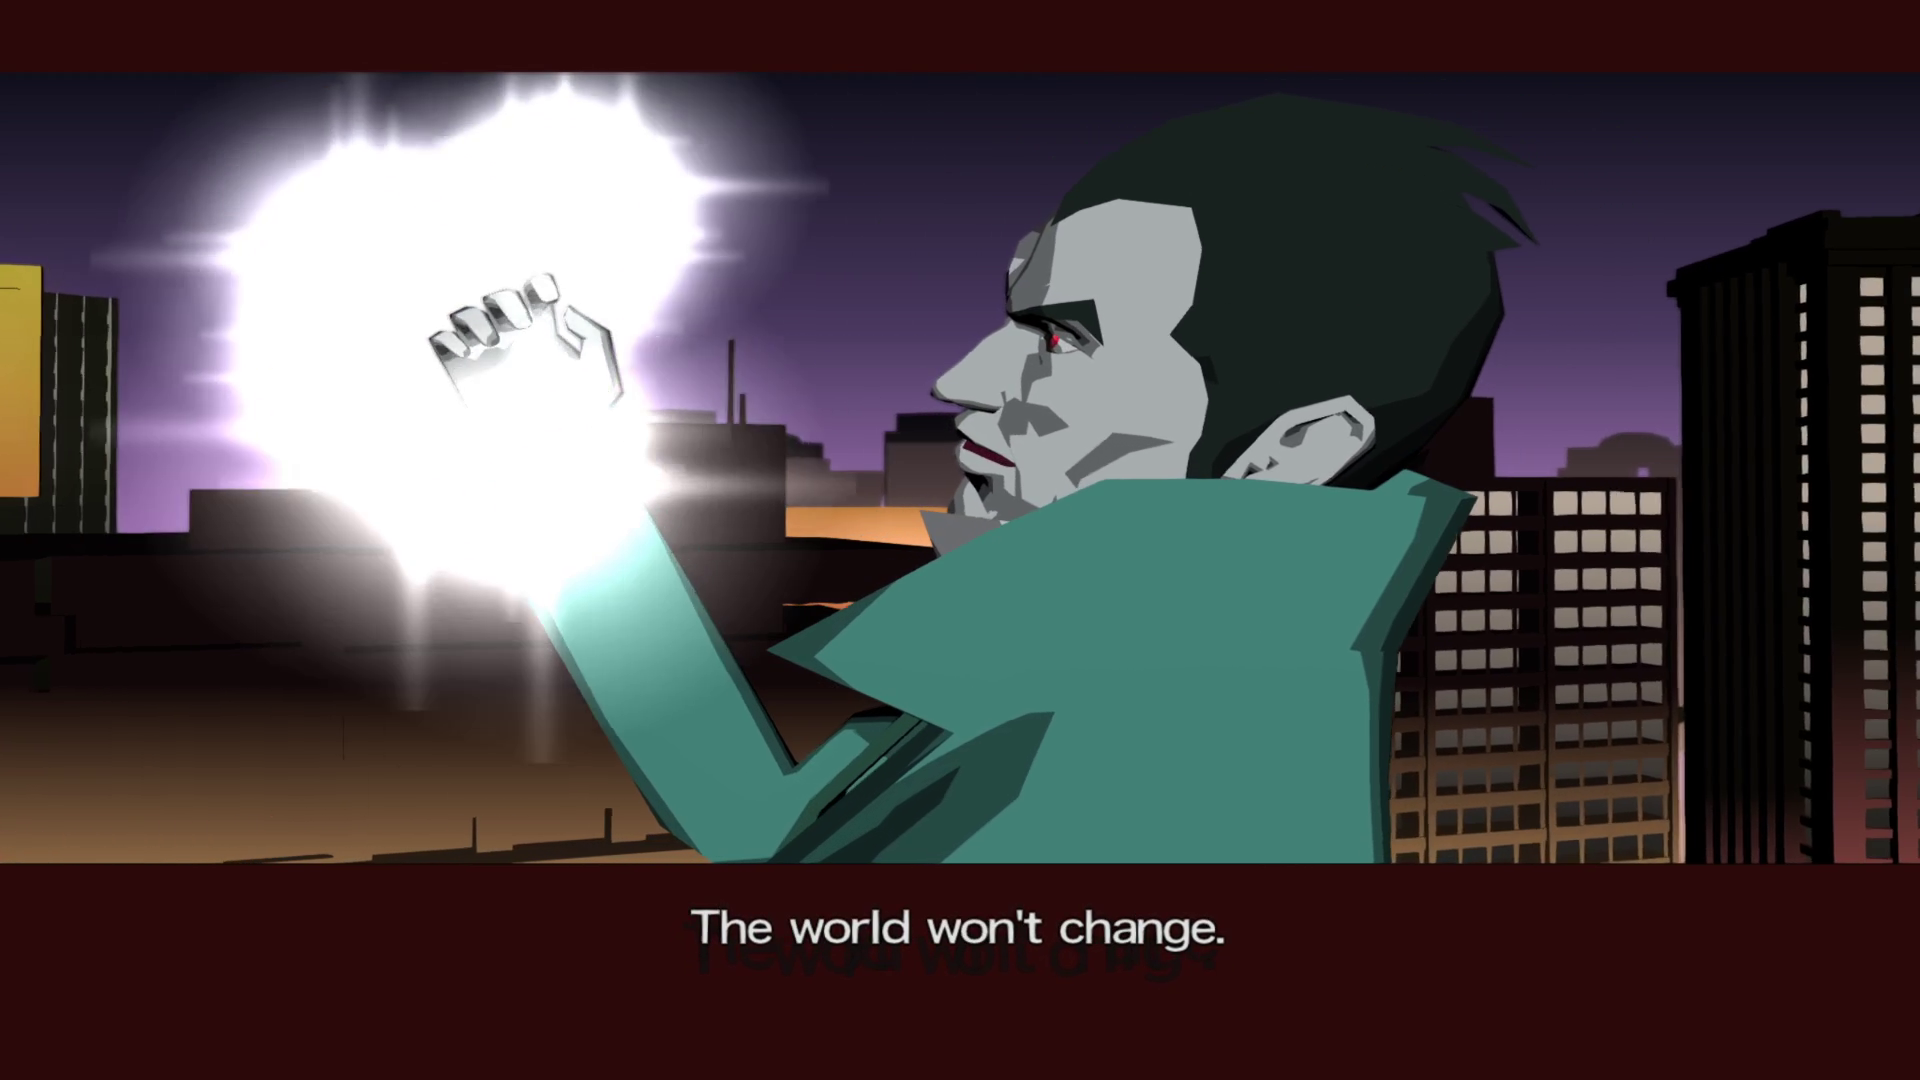 Screenshot from "Lion." Kun Lan raises his glowing right hand. He says, "The world won't change."